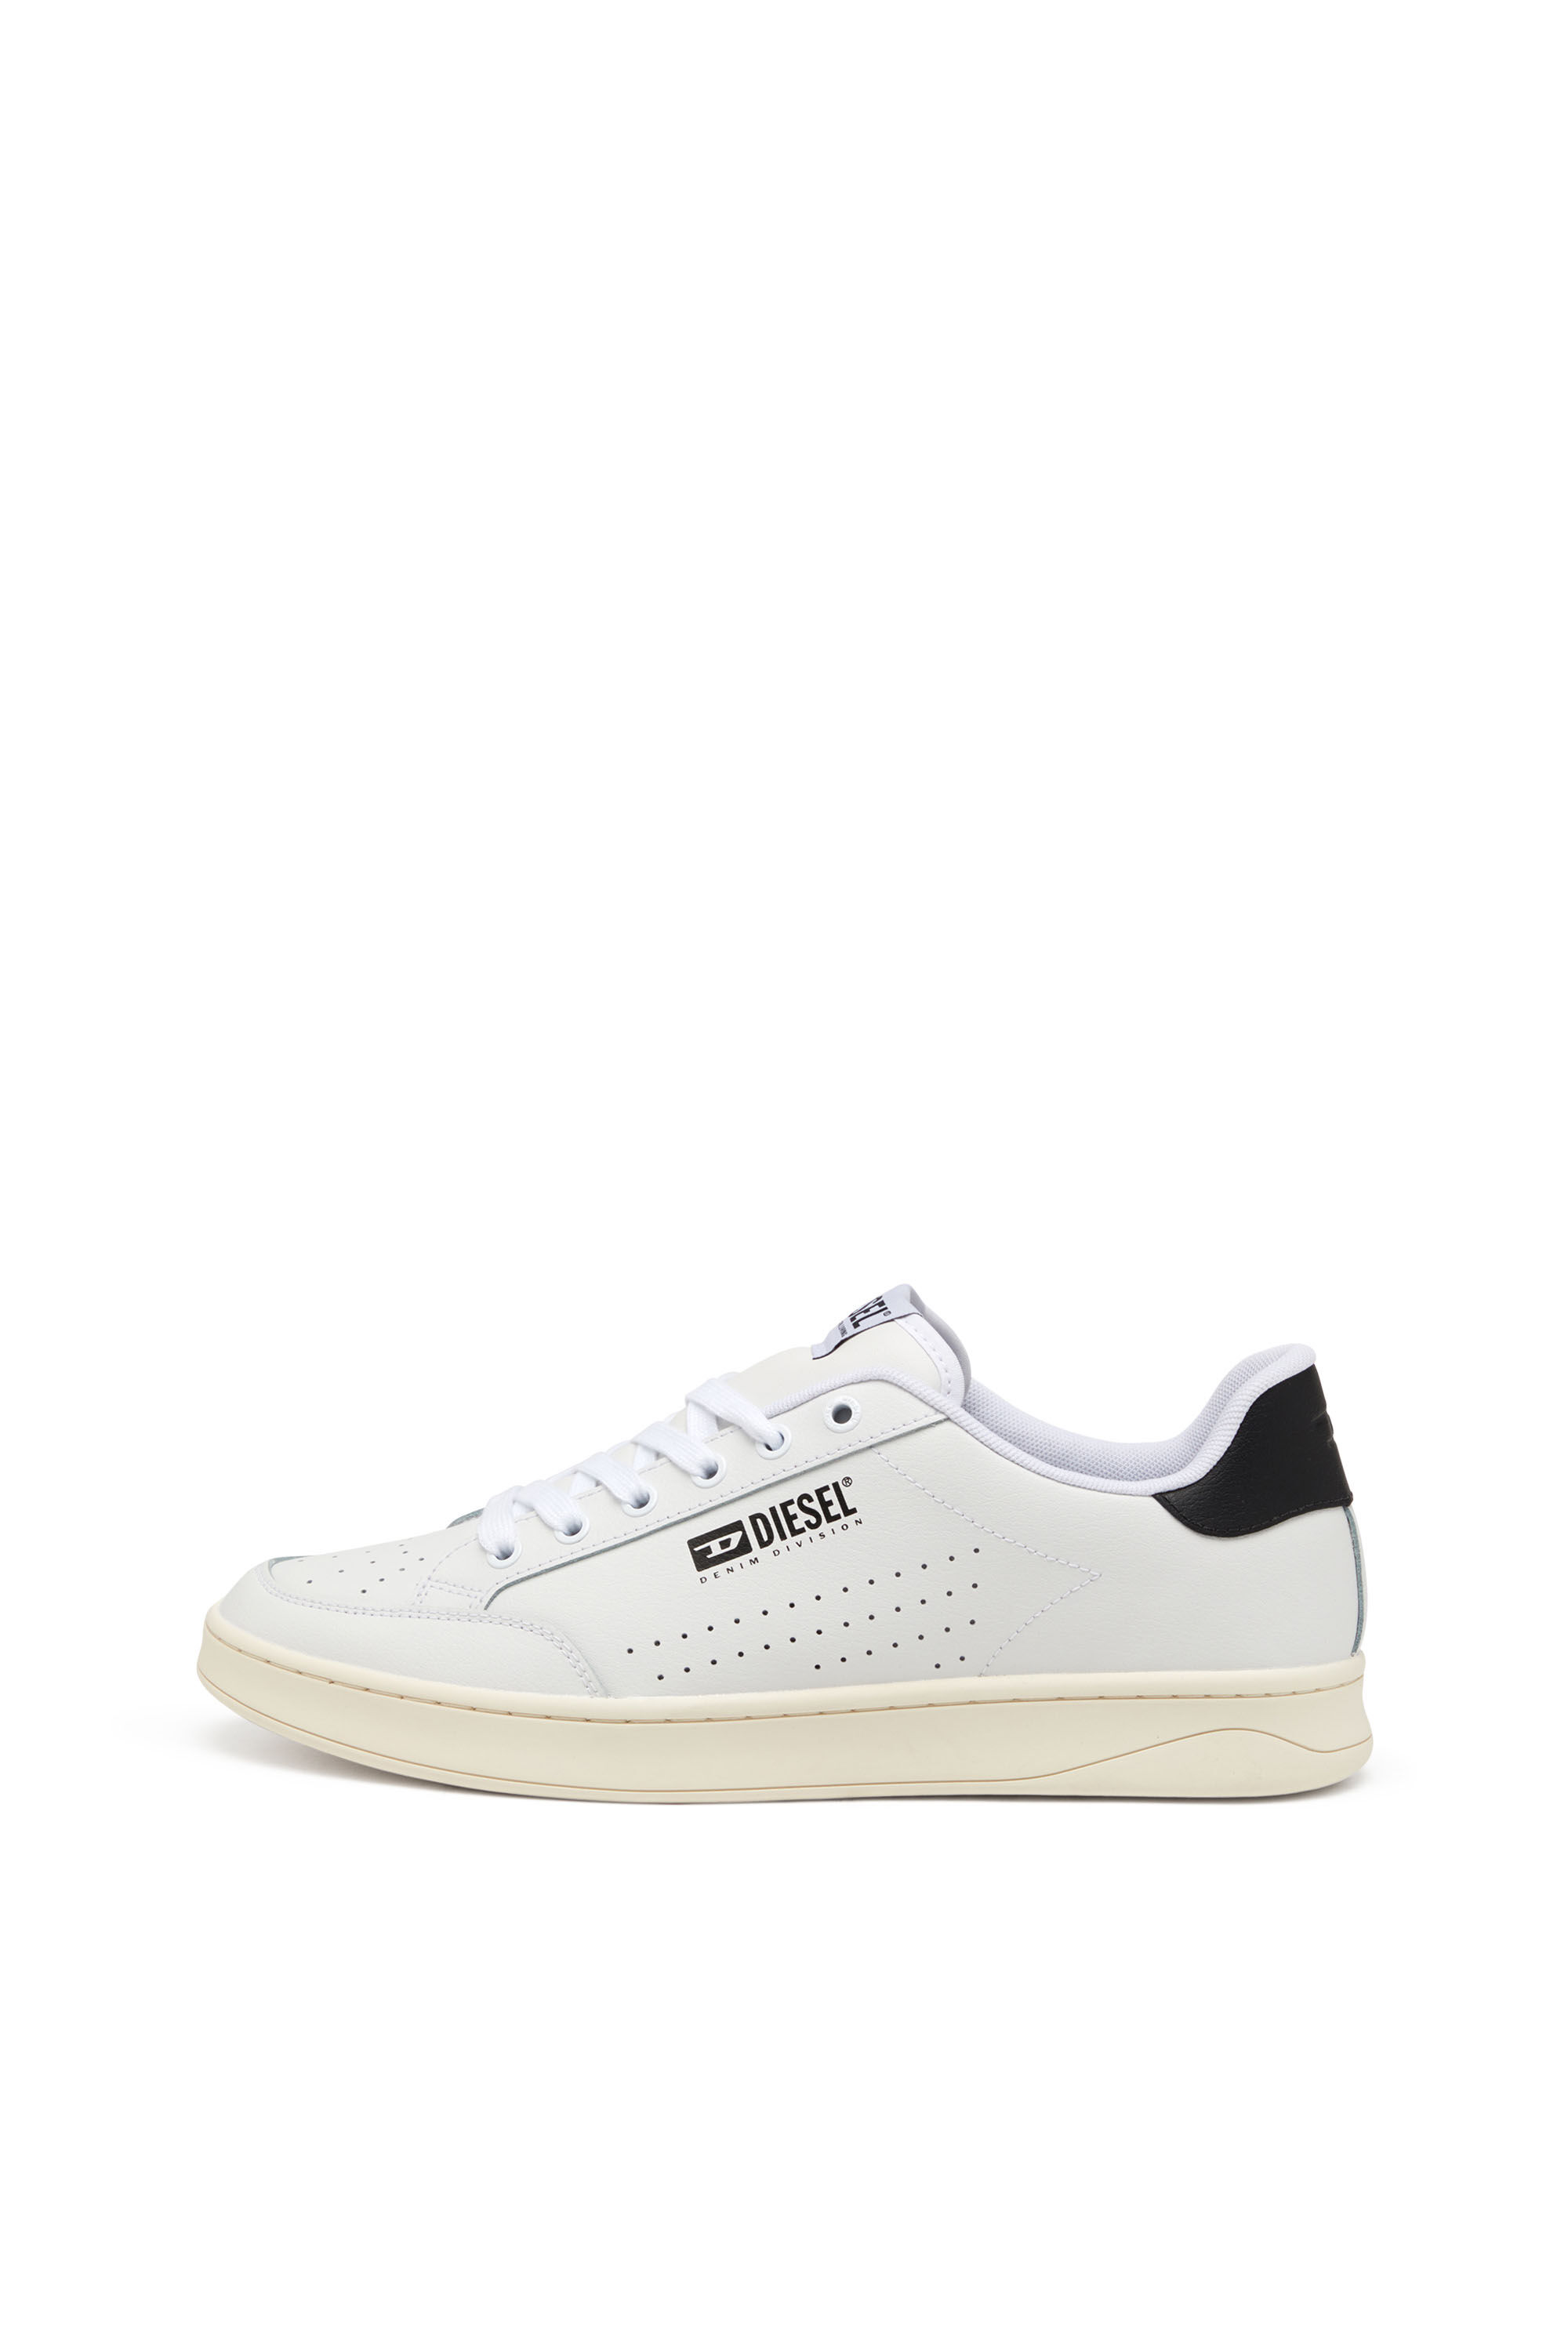 Diesel - S-ATHENE VTG, Man S-Athene-Retro sneakers in perforated leather in Multicolor - Image 7